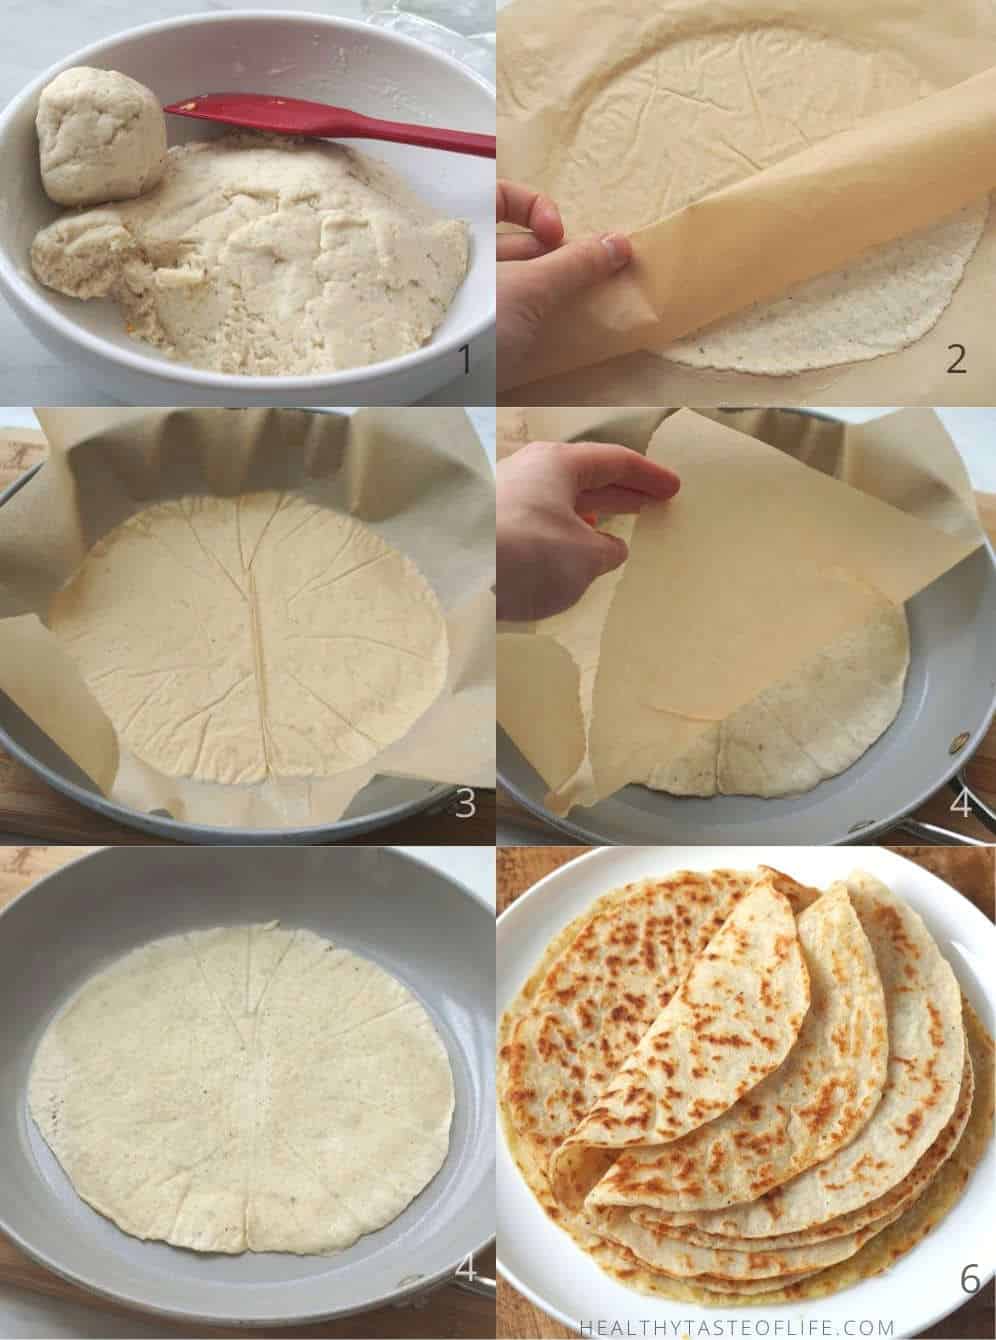 Process shots showing how to make gluten free tortillas wraps using parchment paper and a non-stick skillet.